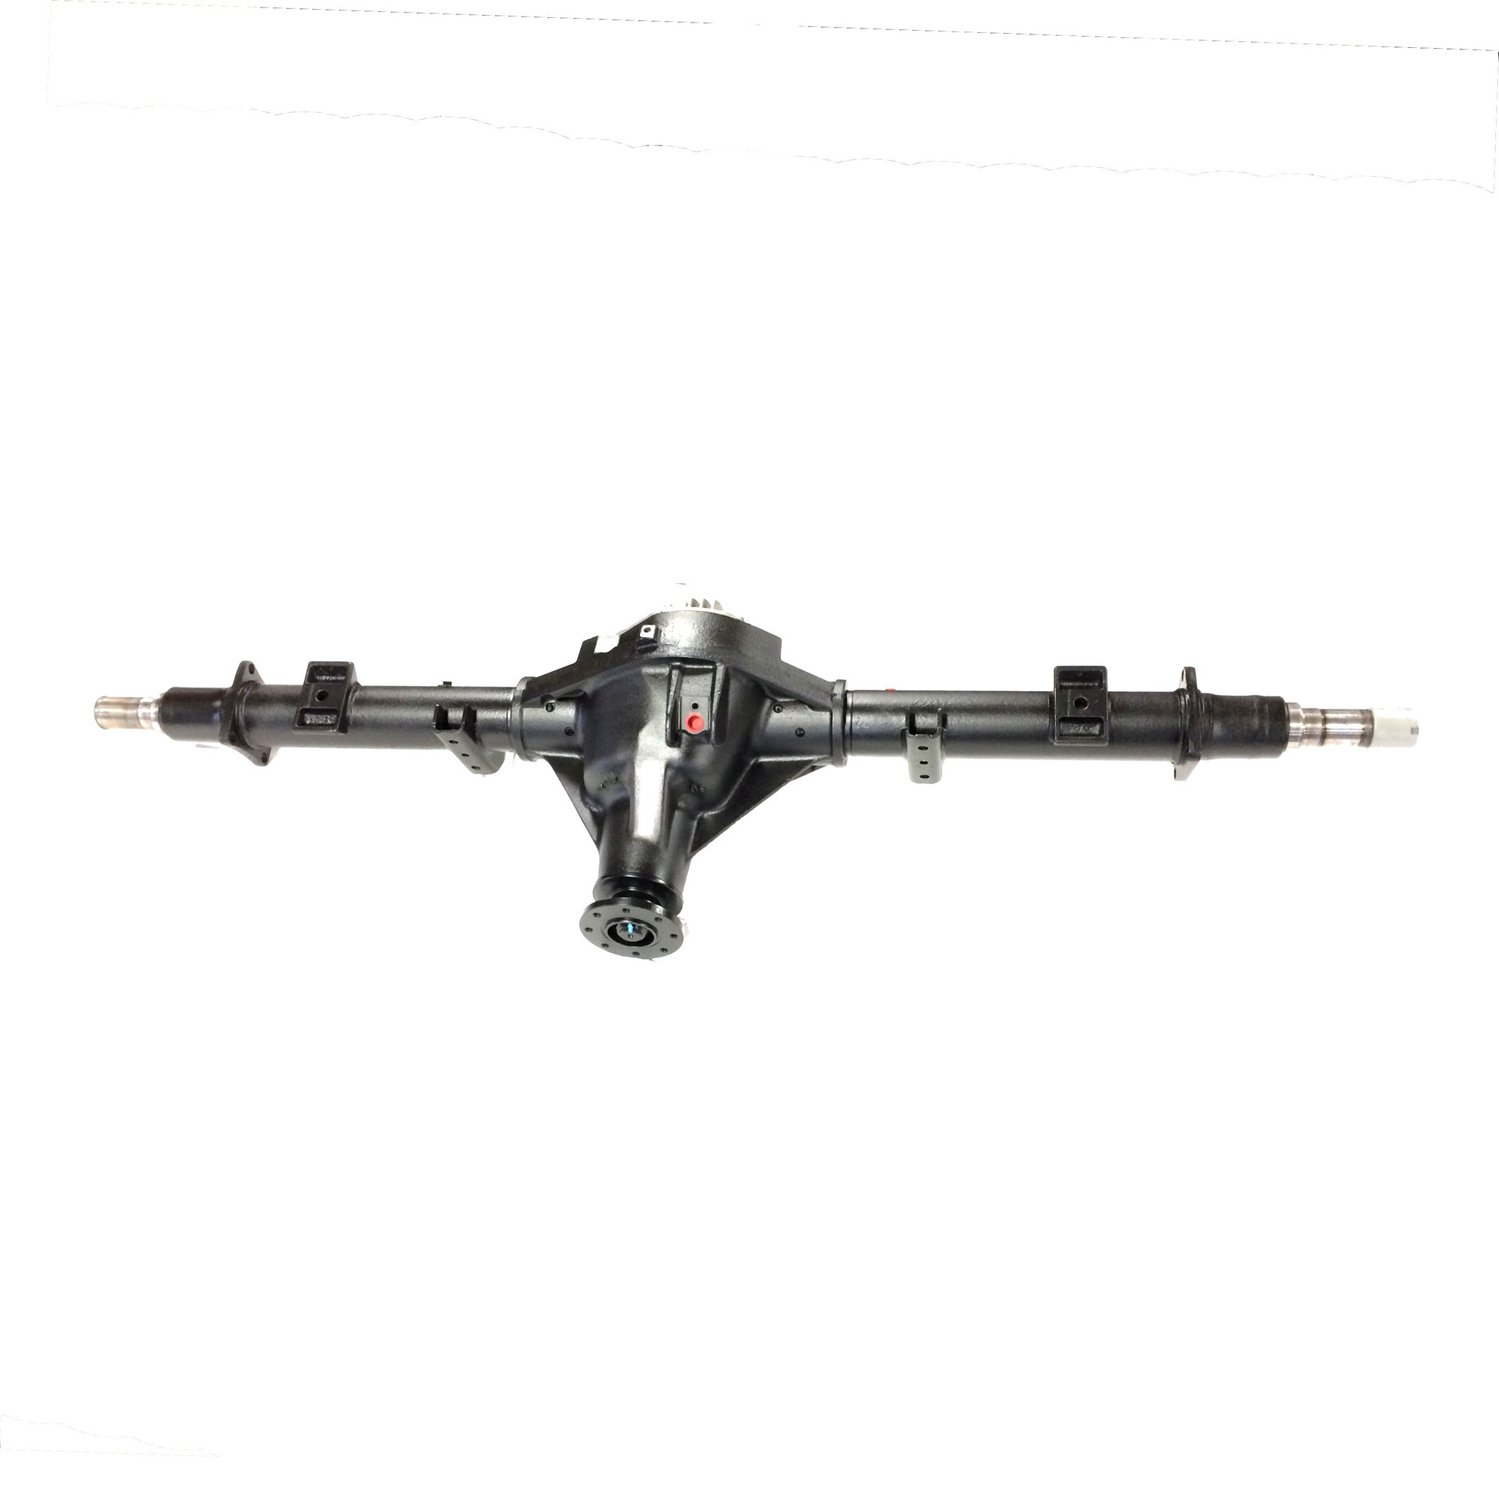 Remanufactured Drivetrain ufactured Rear Axle Assy for Dana 80 with 4:88 Gear